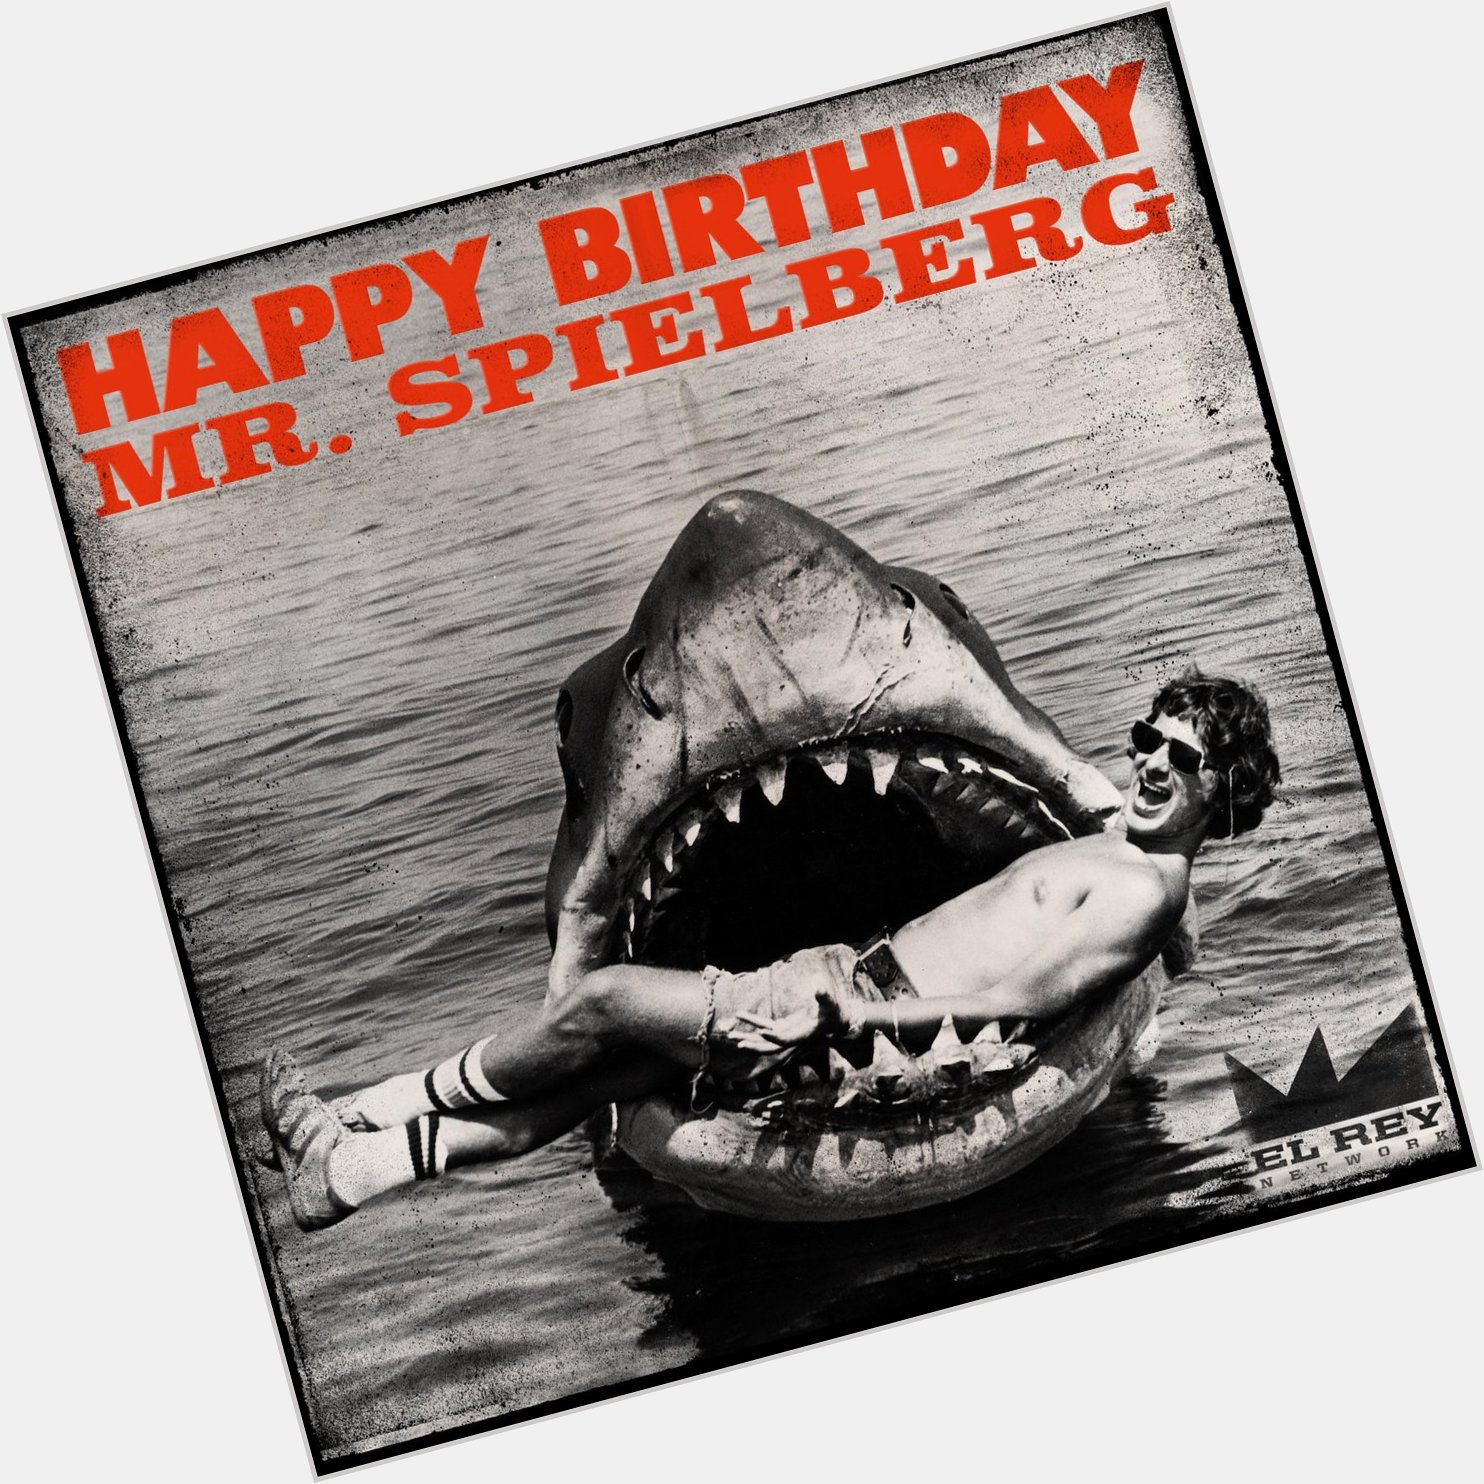 Happy birthday to one of the greatest directors of all time, Steven Spielberg, who turns 69 today! 